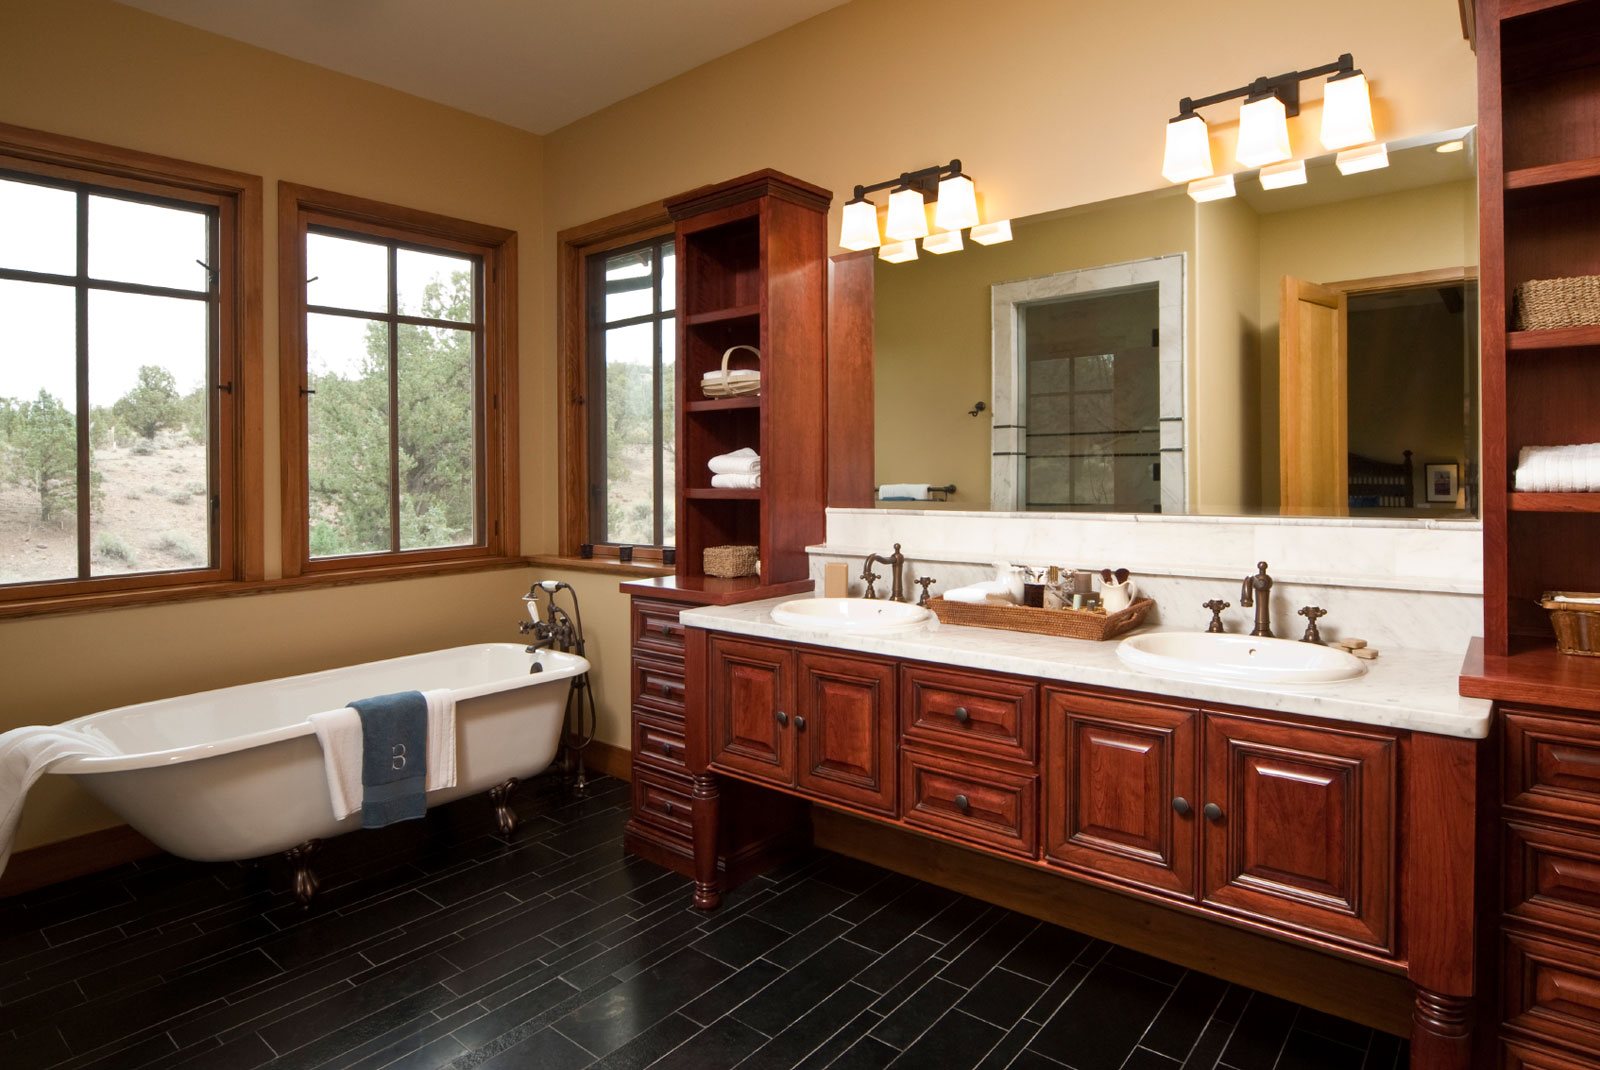 Master Bathroom Black Adorable Master Bathroom Designs Applying Black Flooring Tile With White Free Stand Bathtub Furnished With Dark Brown Vanity Double Sink And Completed With Wall Sconces Bathroom 15 Master Bathroom Design With Sophisticated Decor Accents